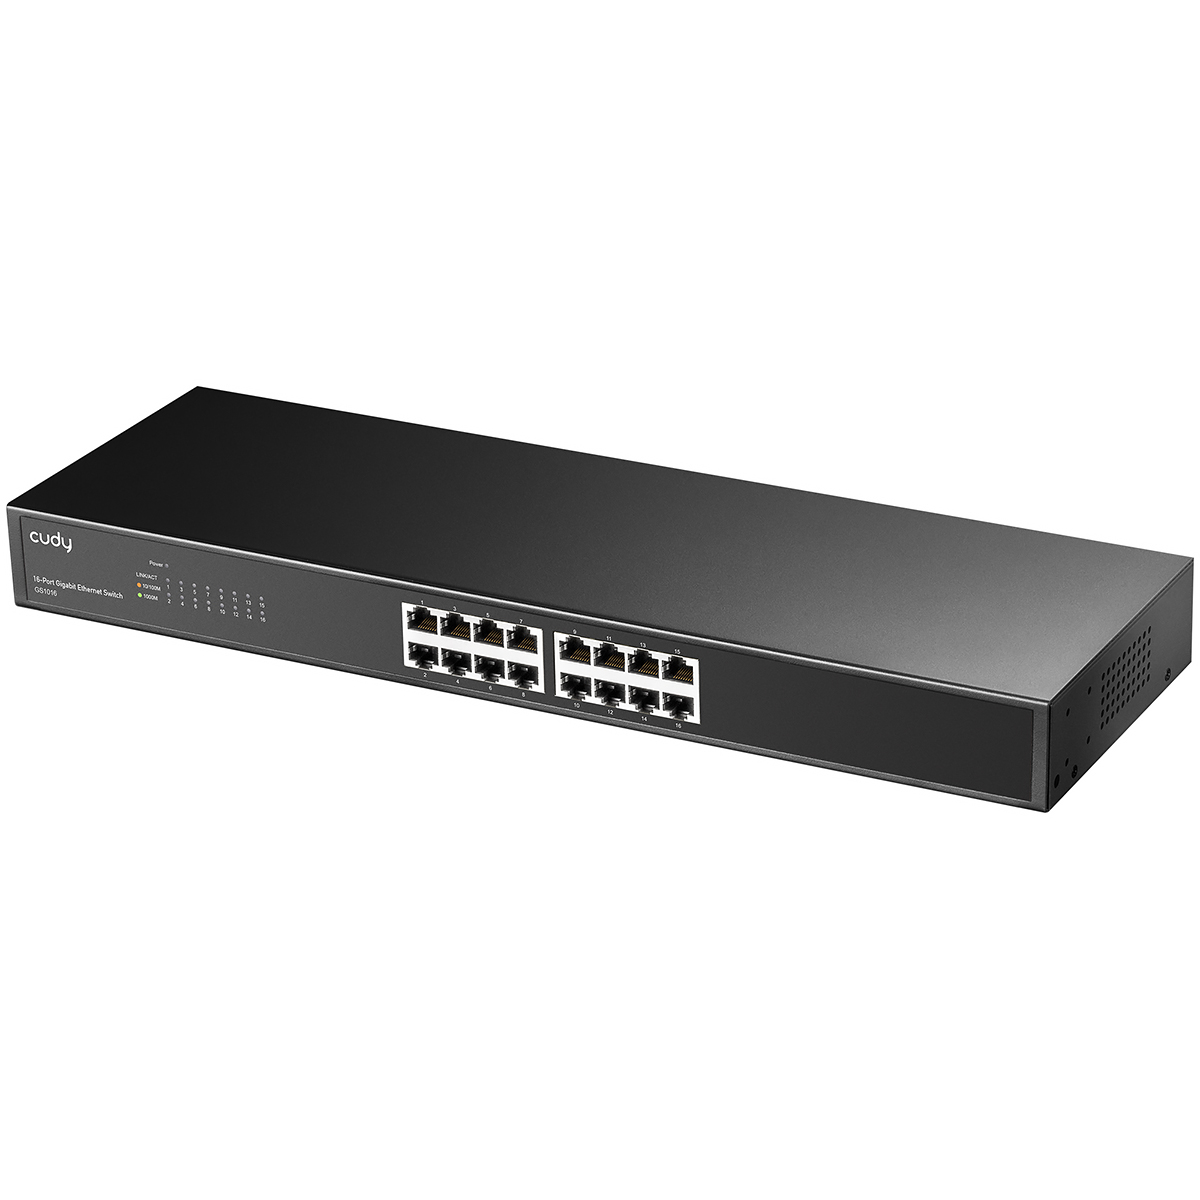 16-Port Gigabit Ethernet Switch, Model: GS1016-Cudy: WiFi, 4G, and 5G  Equipments and Solutions